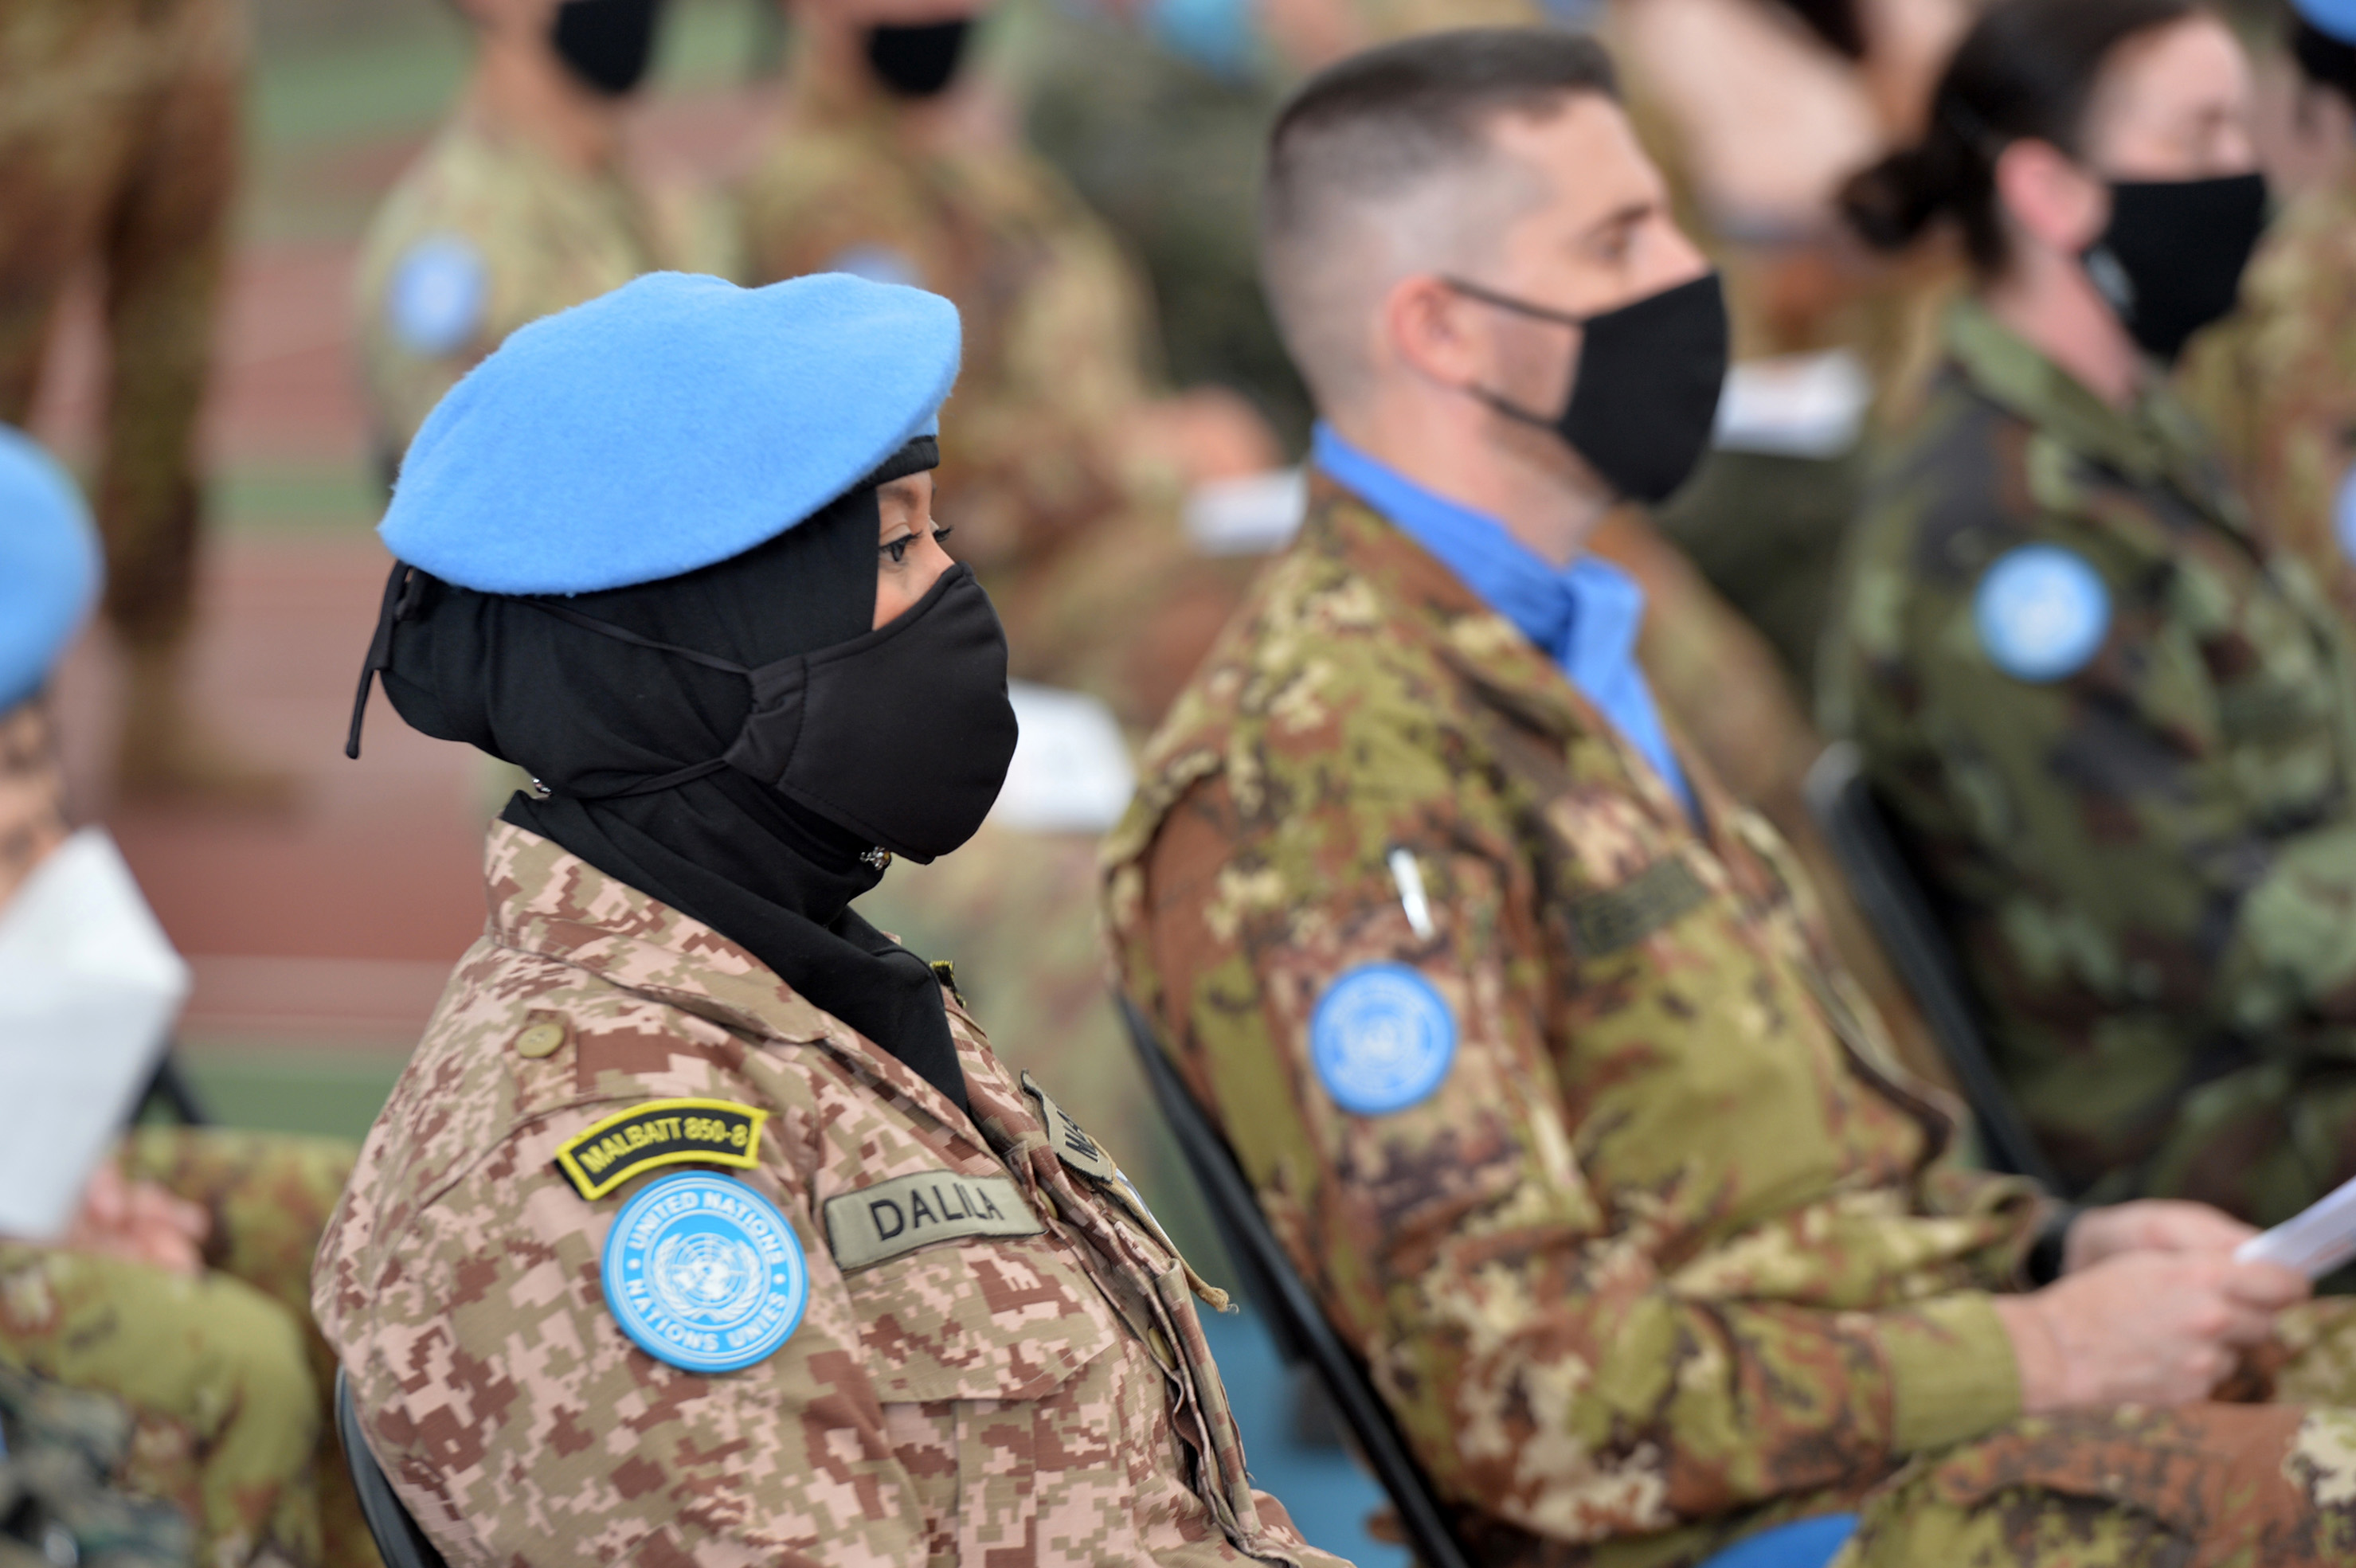 Unifil Joins Nclw In Marking International Day For The Elimination Of Violence Against Women